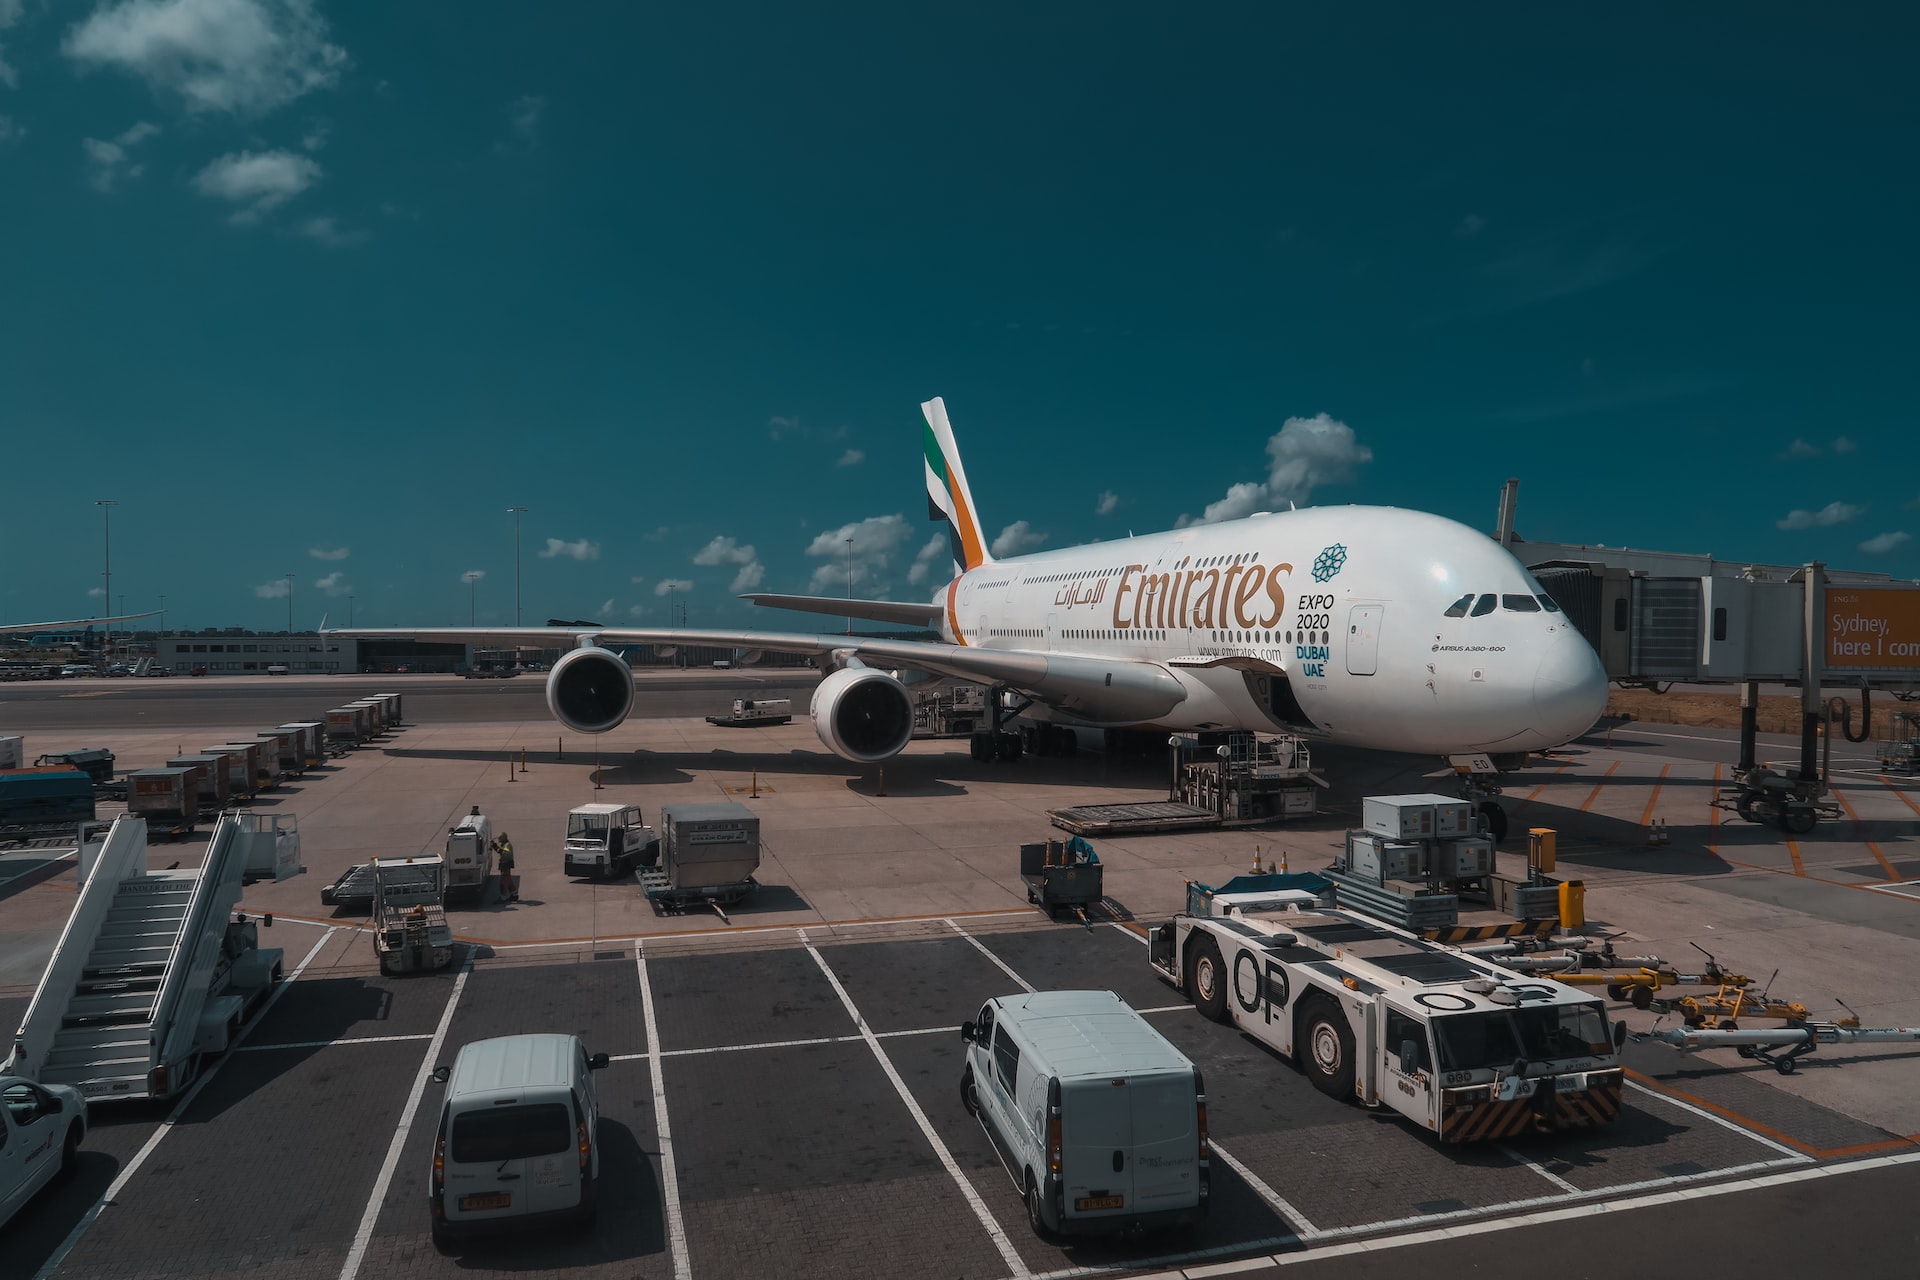 An Emirates airlines jumbo jet parked at a jetway.